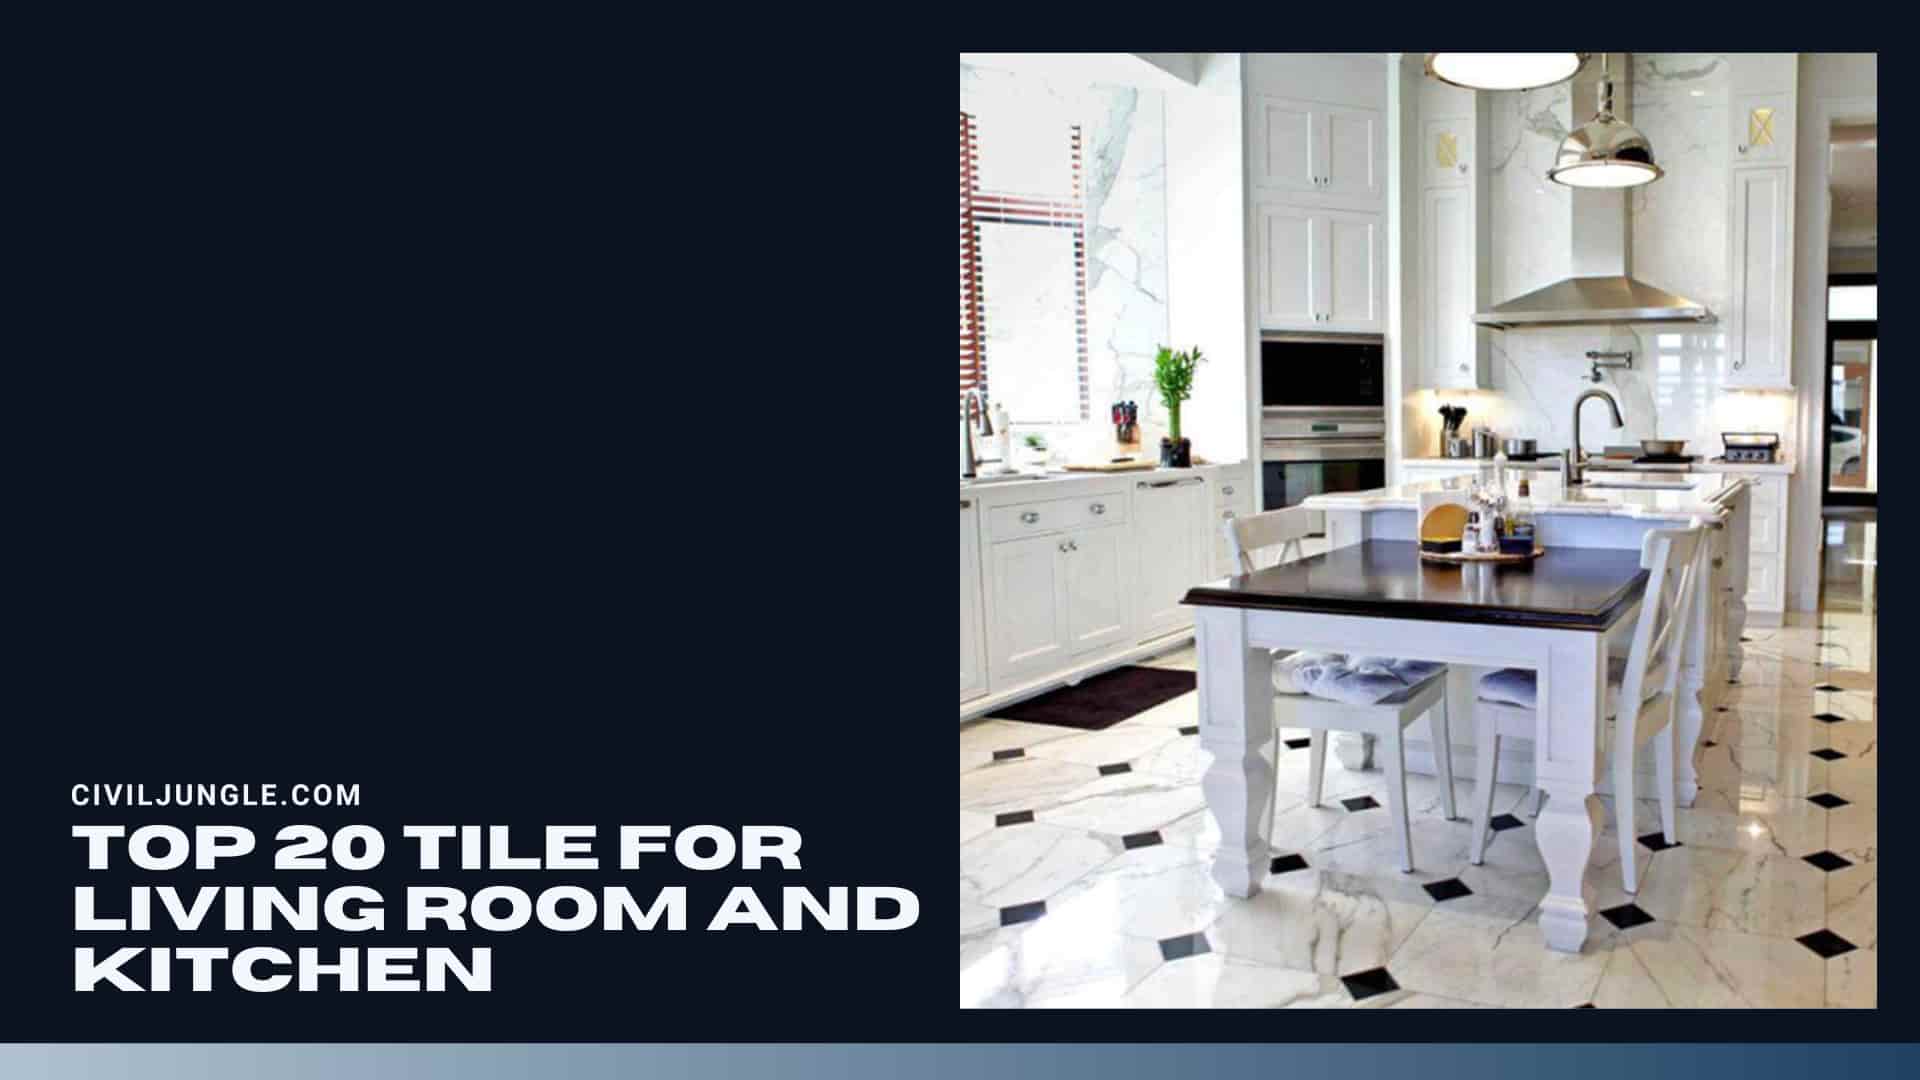 Top 20 Tile for Living Room and Kitchen